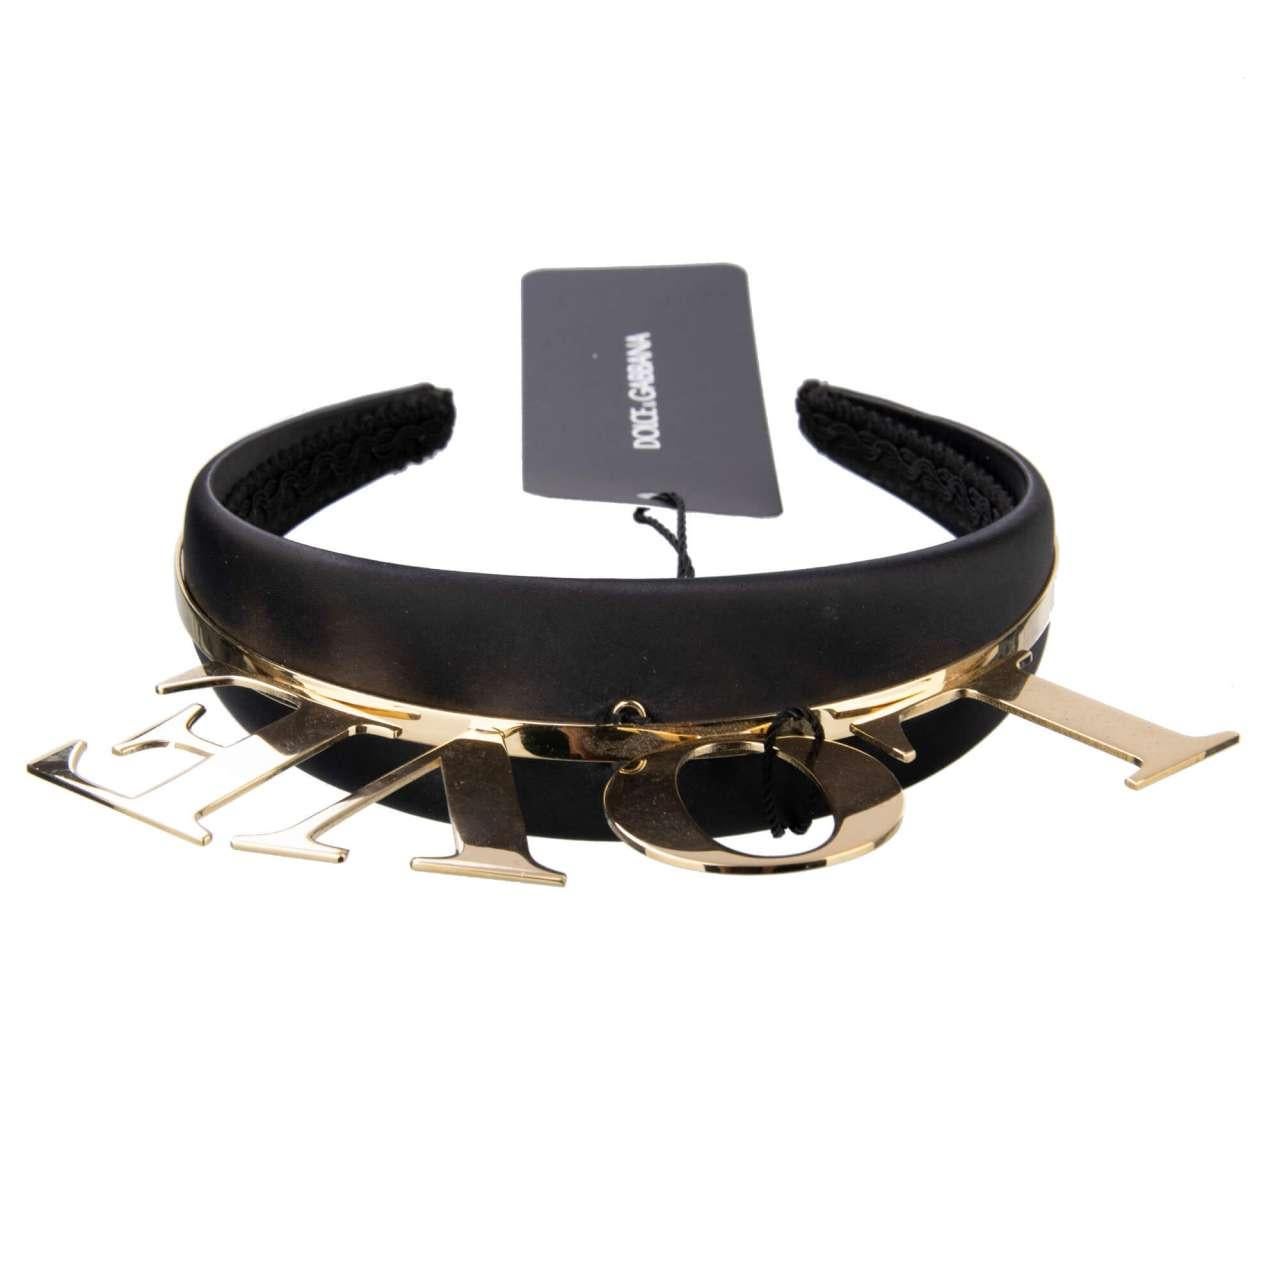 - Hairband embelished with Brass Love Letters in black and gold by DOLCE & GABBANA - MADE IN ITALY - New with Tag - Modell: WHJ8S4-W1111-ZOO00 - Composition: 50% Nylon, 50% Brass - Color: Black / Gold - Dimensions: Letter 3 cm length, Hairband 4 cm